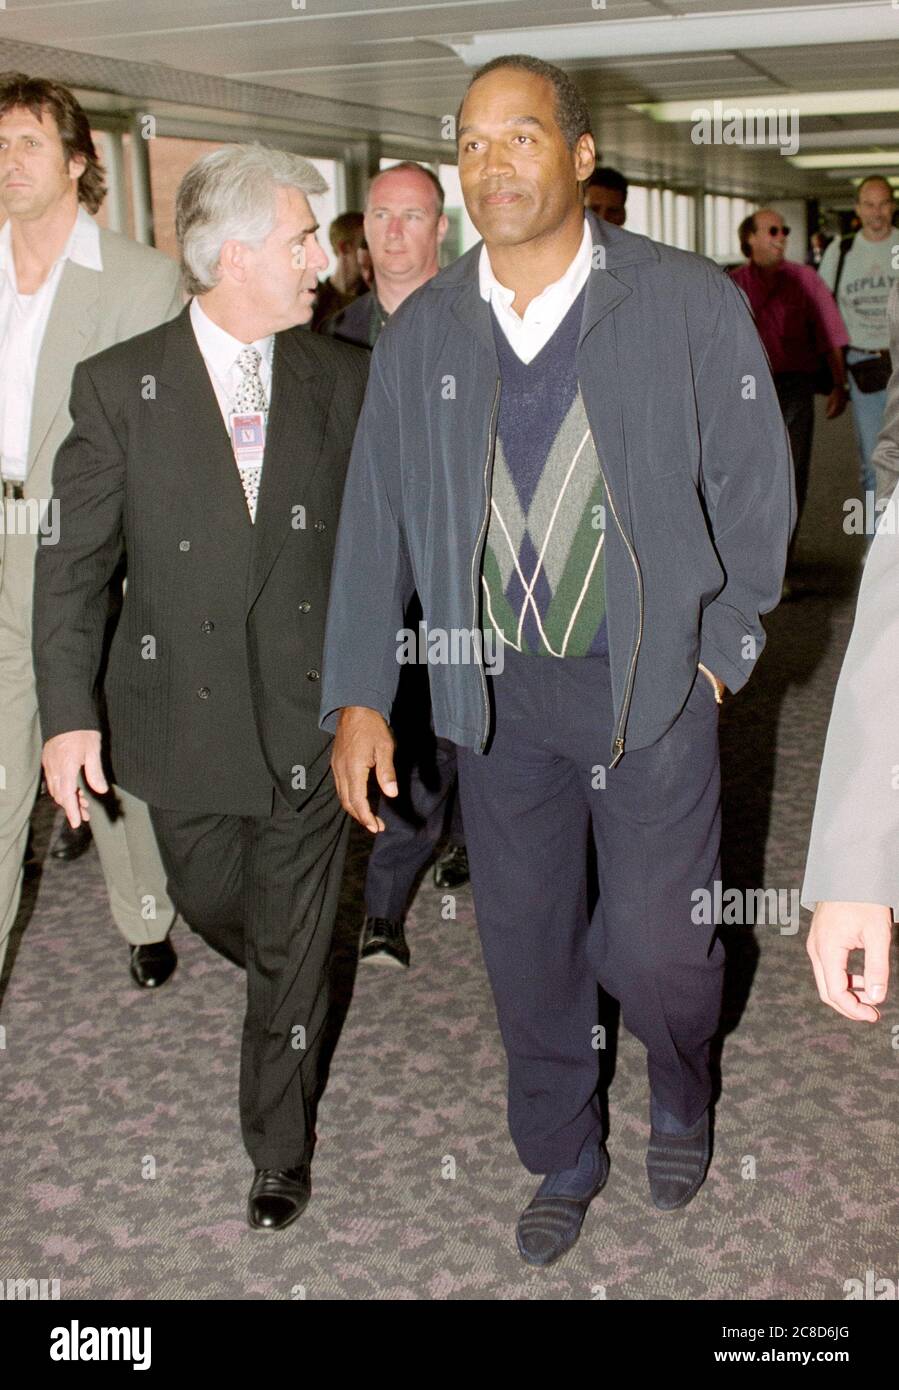 Former professional American football player O J Simpson arriving at London's Heathrow Airport in 1996 for a publicity tour in the U.K. with British publicist Max Clifford following his acquittal of the murders of his former wife, Nicole Brown Simpson, and her friend, Ron Goldman. Stock Photo